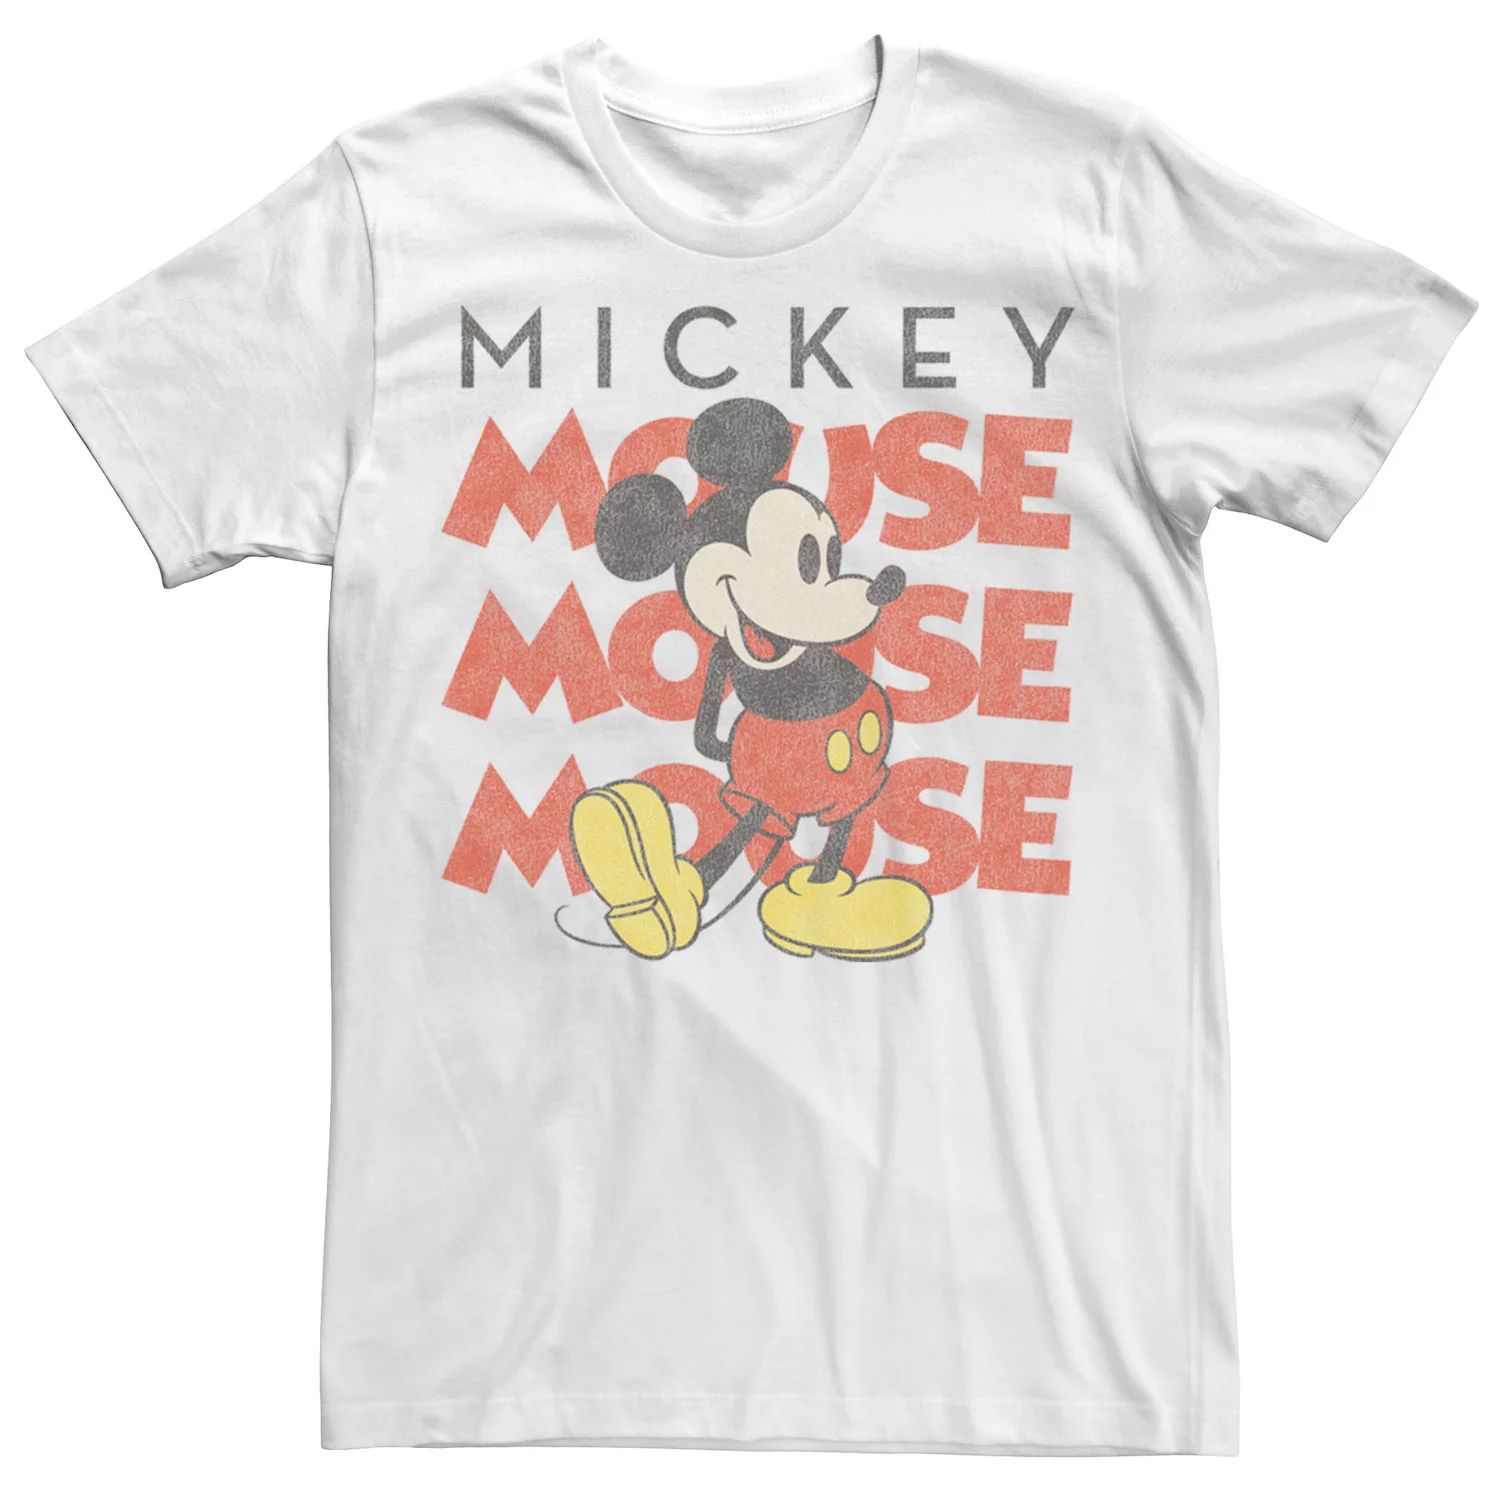 Мужская футболка Disney Mickey and Friends Mickey Mouse Mouse Licensed Character мужская футболка disney epic mickey and oswald со вставками licensed character